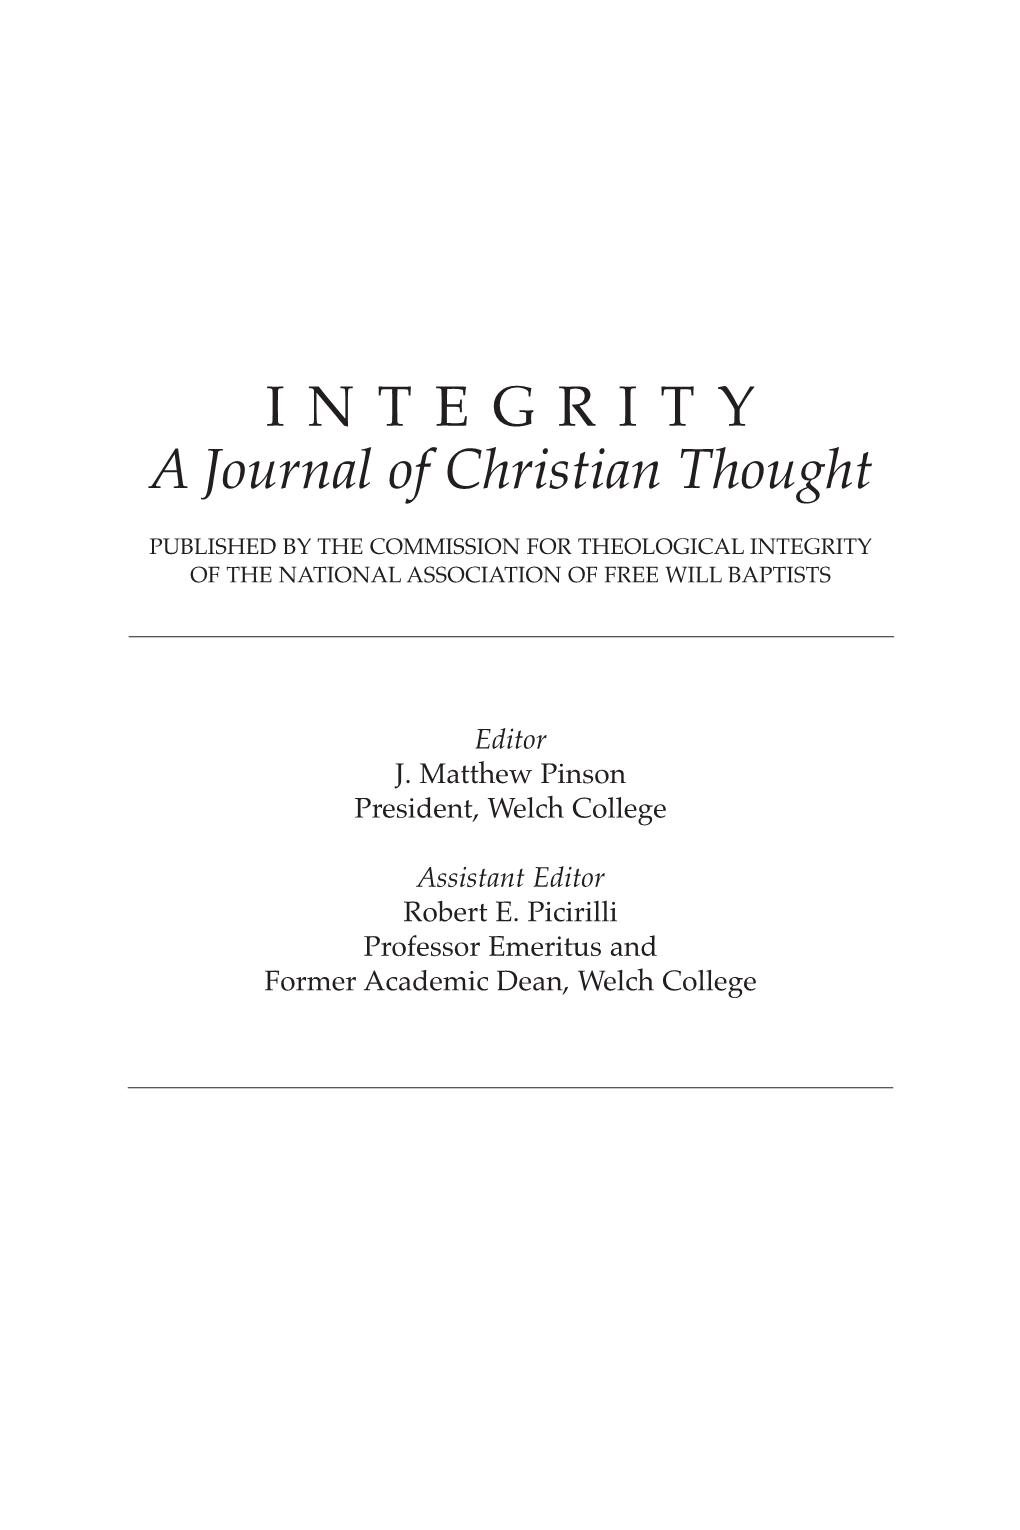 INTEGRITY a Journal of Christian Thought PUBLISHED by the COMMISSION for THEOLOGICAL INTEGRITY of the NATIONAL ASSOCIATION of FREE WILL BAPTISTS